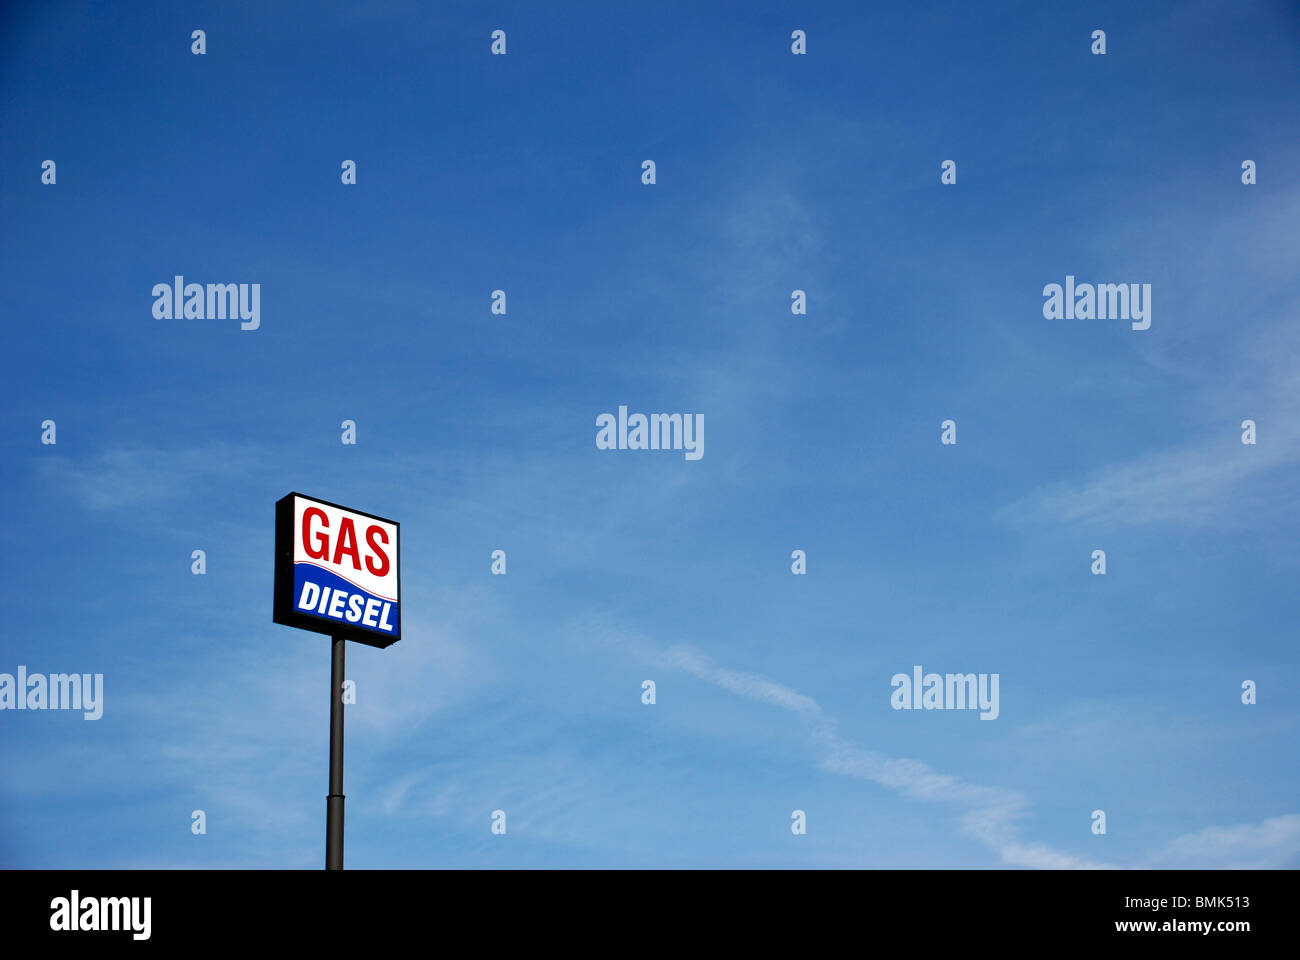 Gas station sign with the words Gas and Diesel on a long pole against blue sky. Stock Photo